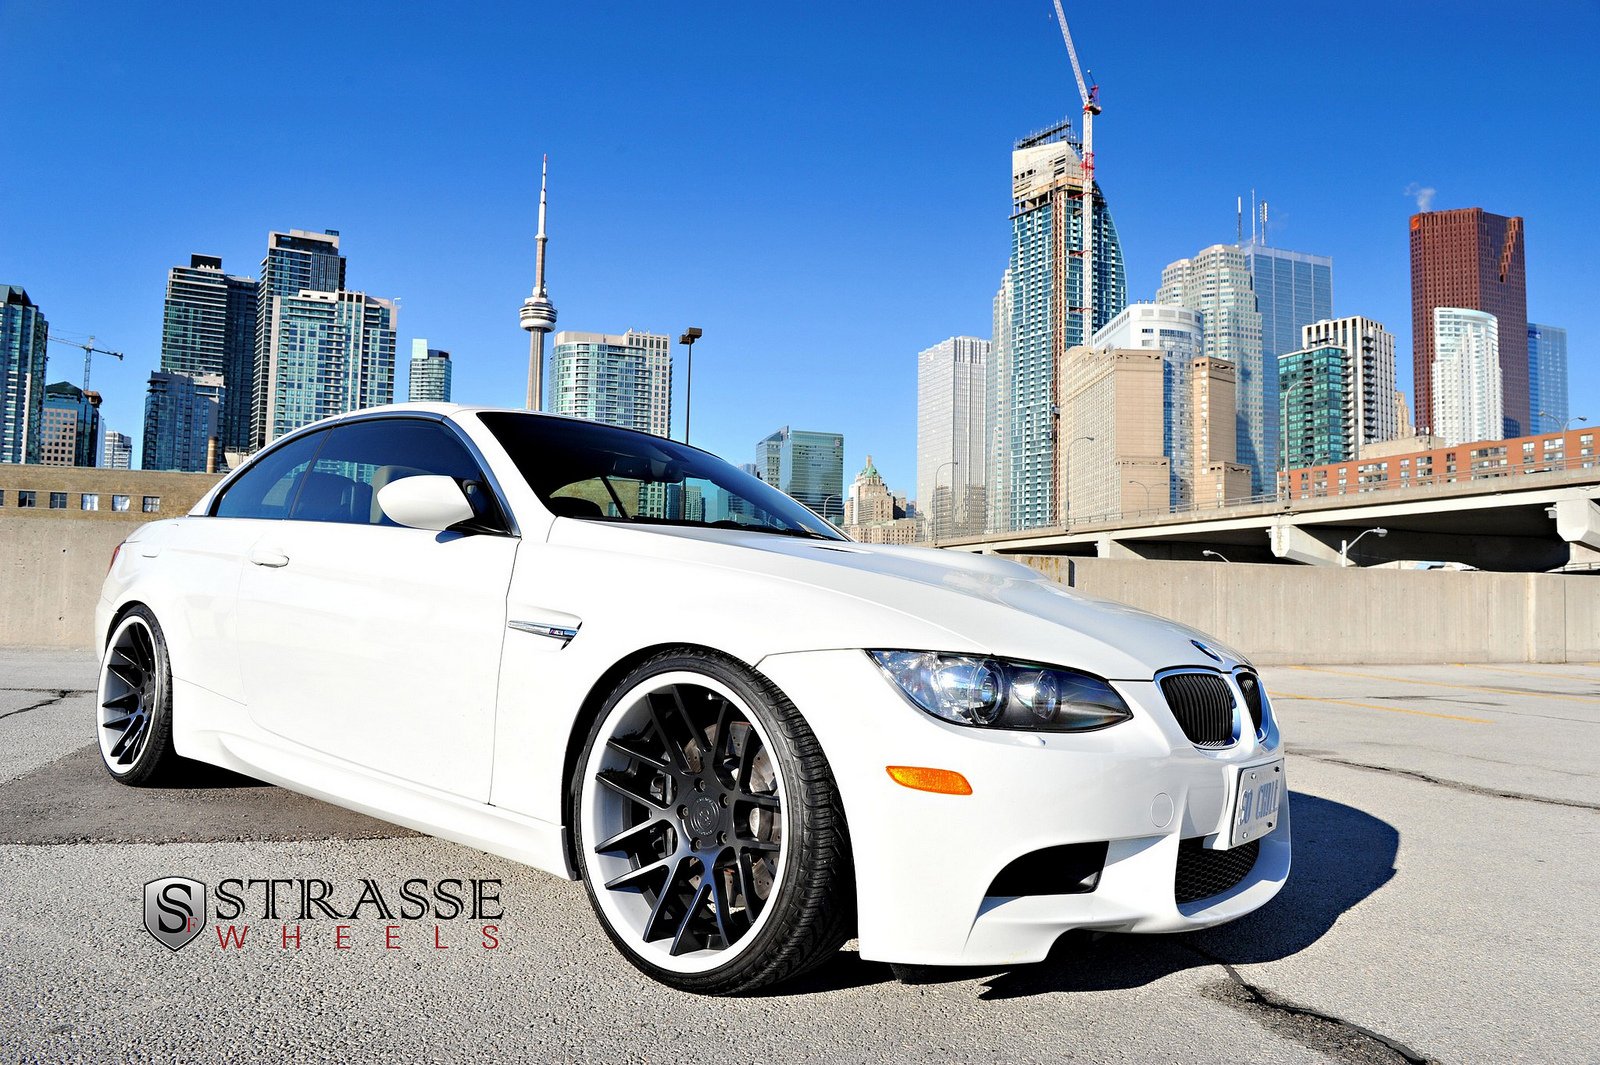 bmw, M3, E92, Convertible, White, Germany, Strasse, Wheels, Tuning, Cars Wallpaper